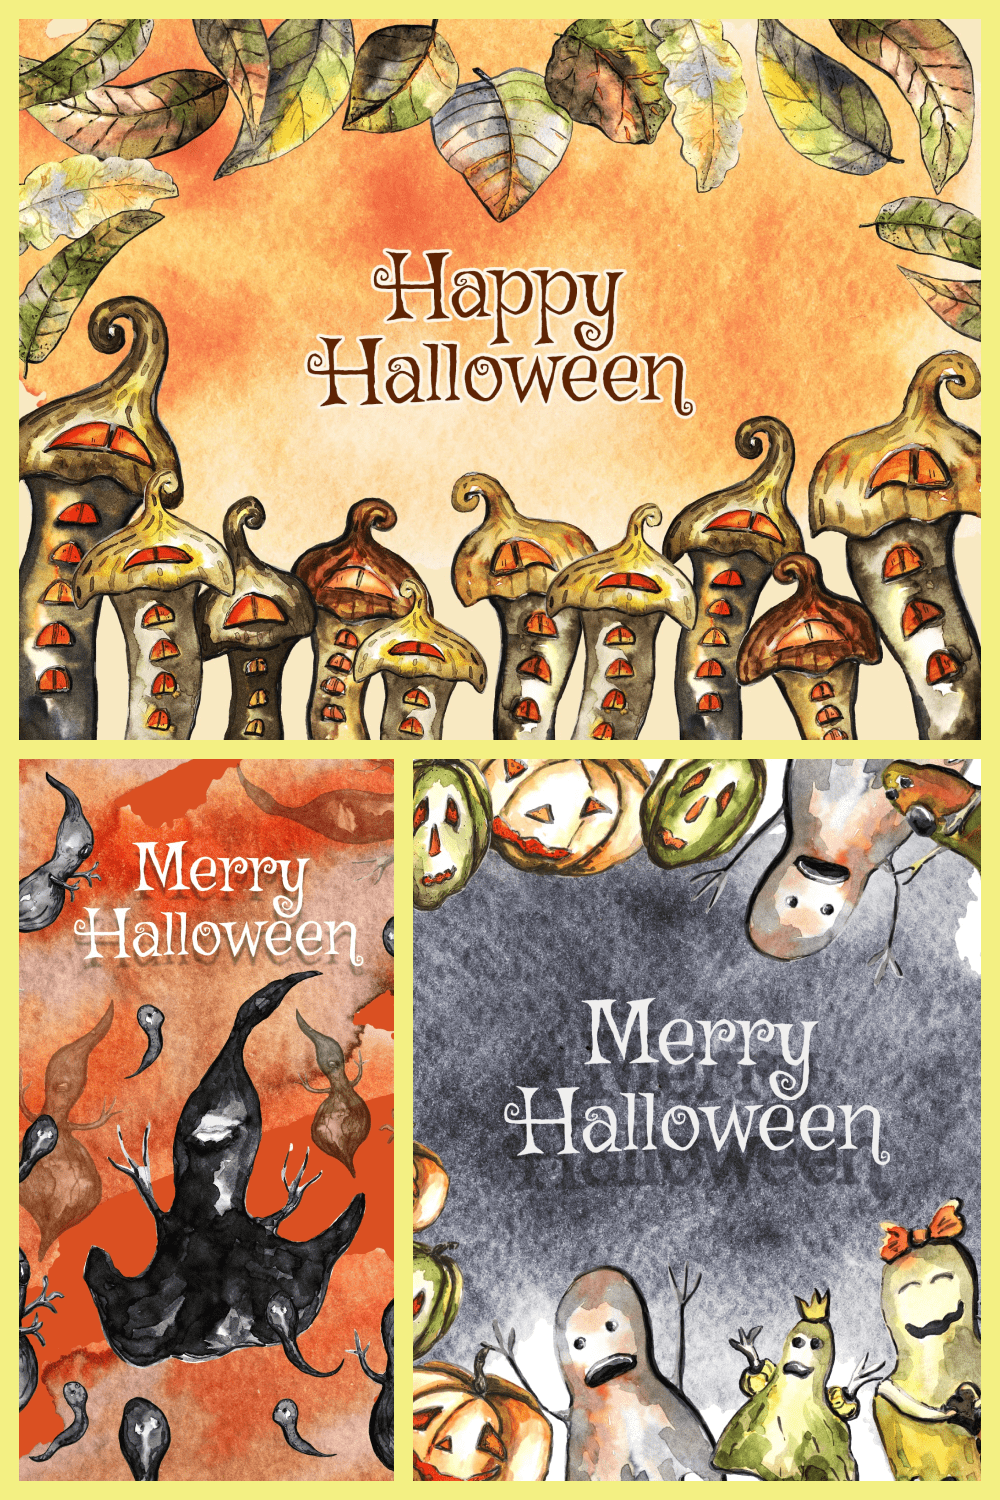 Contemporary and stylish watercolor Halloween illustrations.